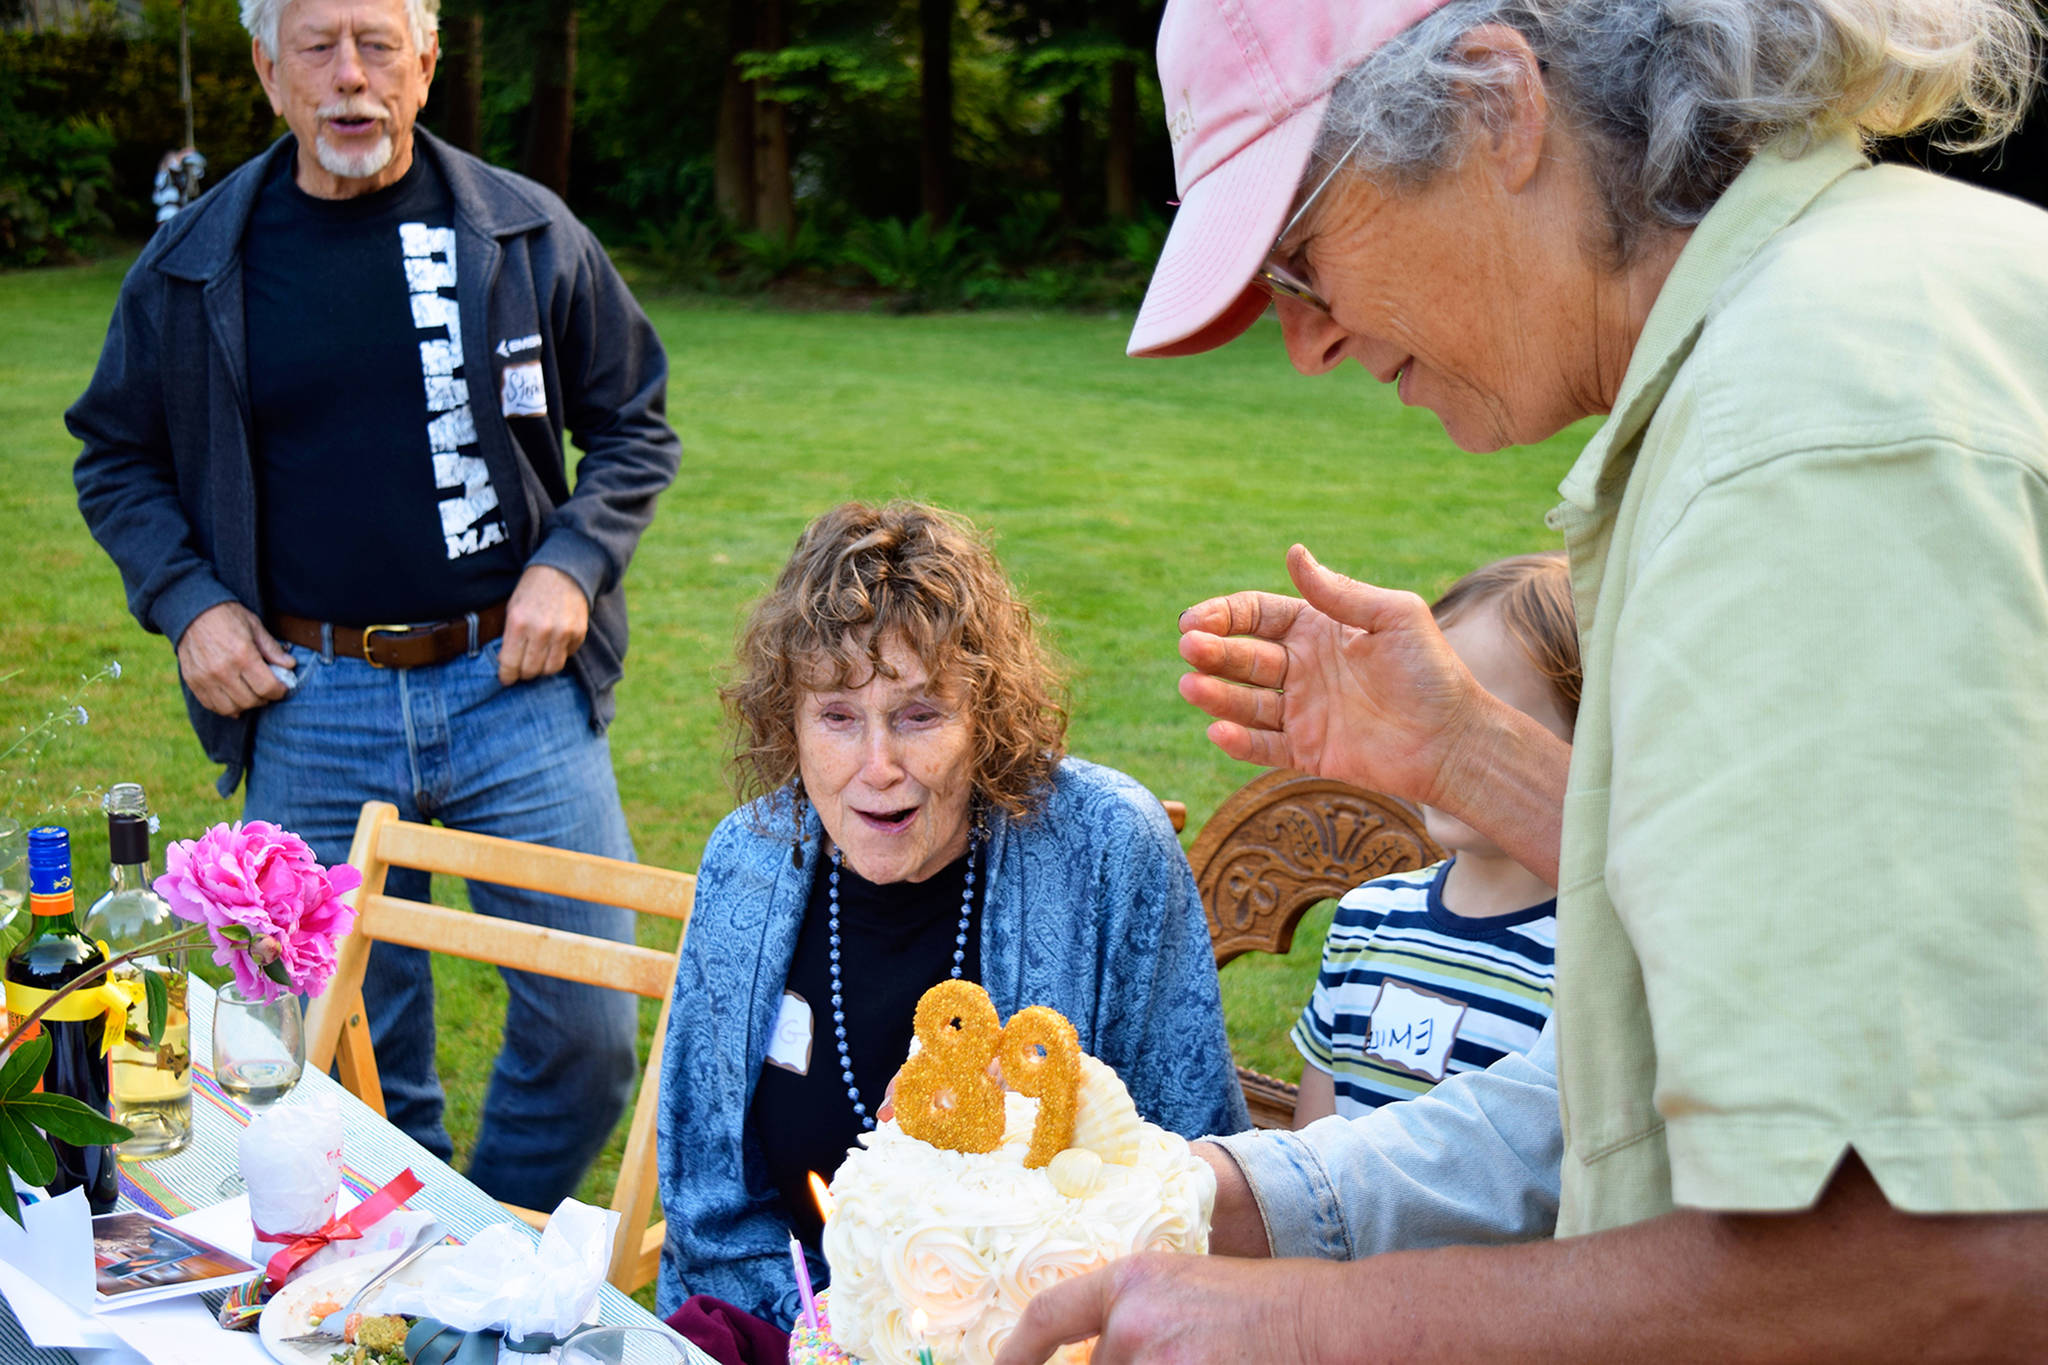 Cary Peterson (right) presents her mother, Meg Noble Peterson, with a birthday cake recently at a Langley neighborhood picnic. Peterson, who just turned 89, is representative of Whidbey Island’s ranking as a leader in longevity. Photos by Patricia Guthrie/Whidbey News-Times